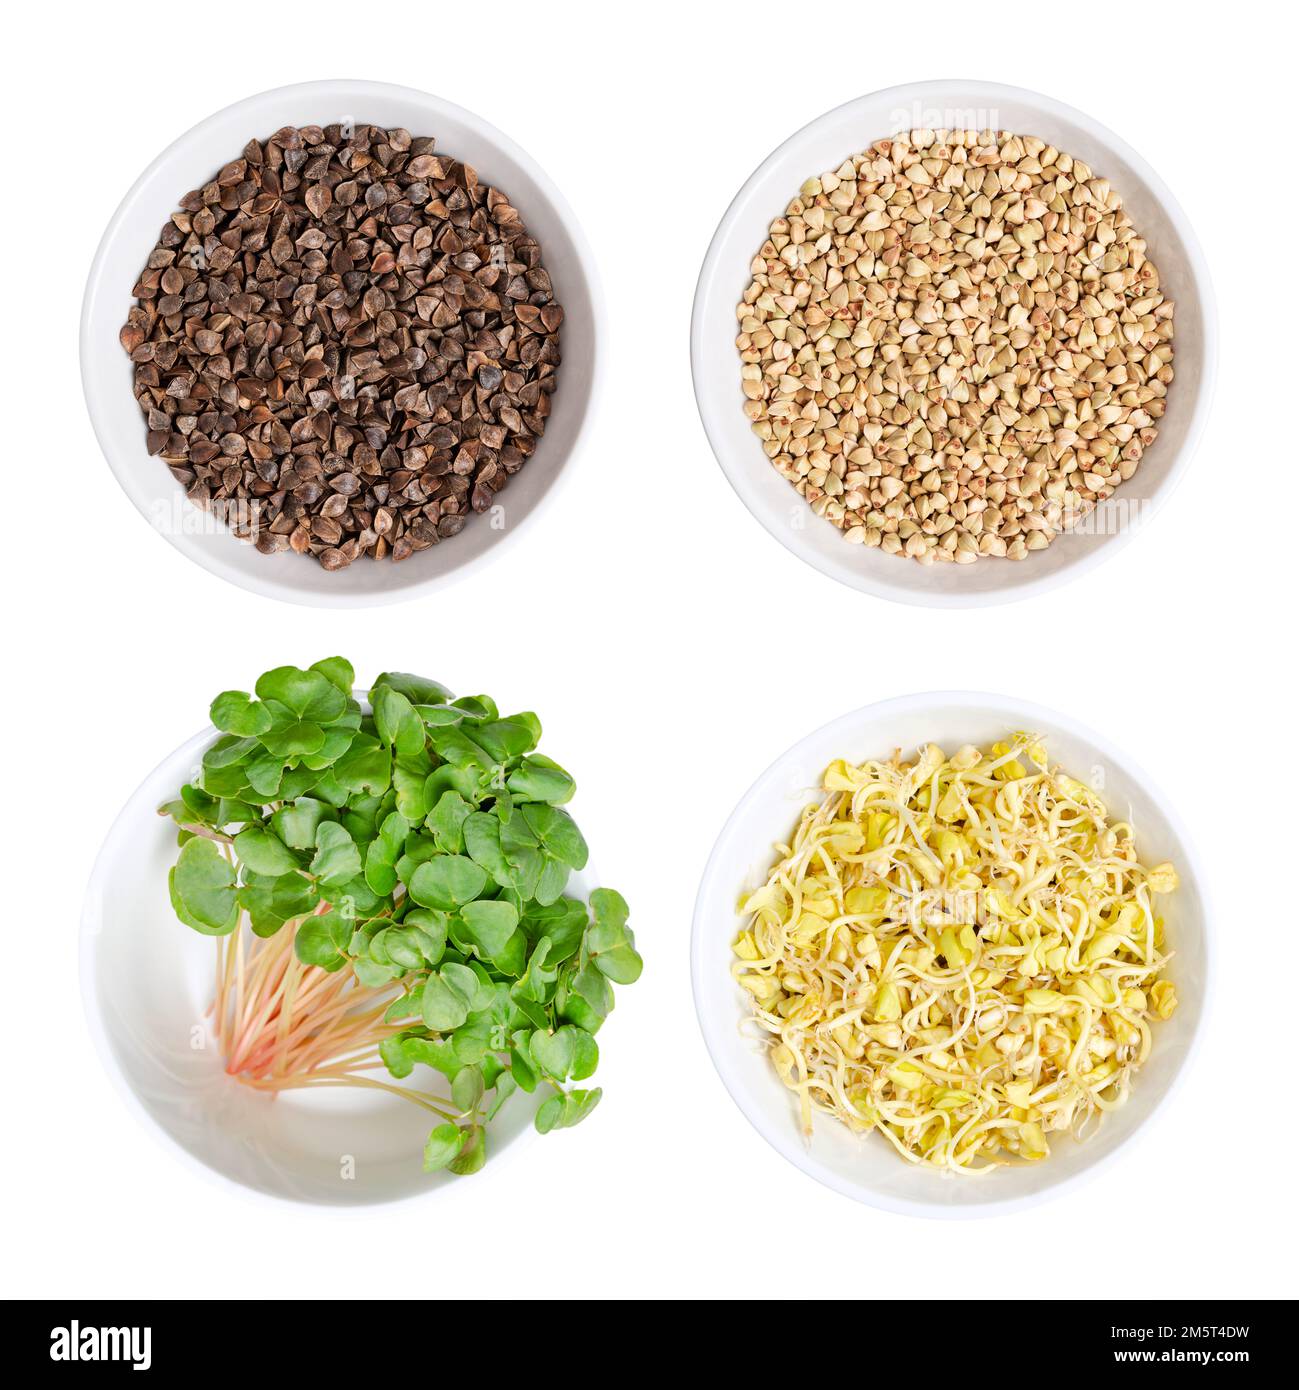 Buckwheat seeds, microgreens and sprouts in bowls. Seeds with husks, grain, seedlings and sprouts of Fagopyrum esculentum, a gluten-free pseudocereal. Stock Photo